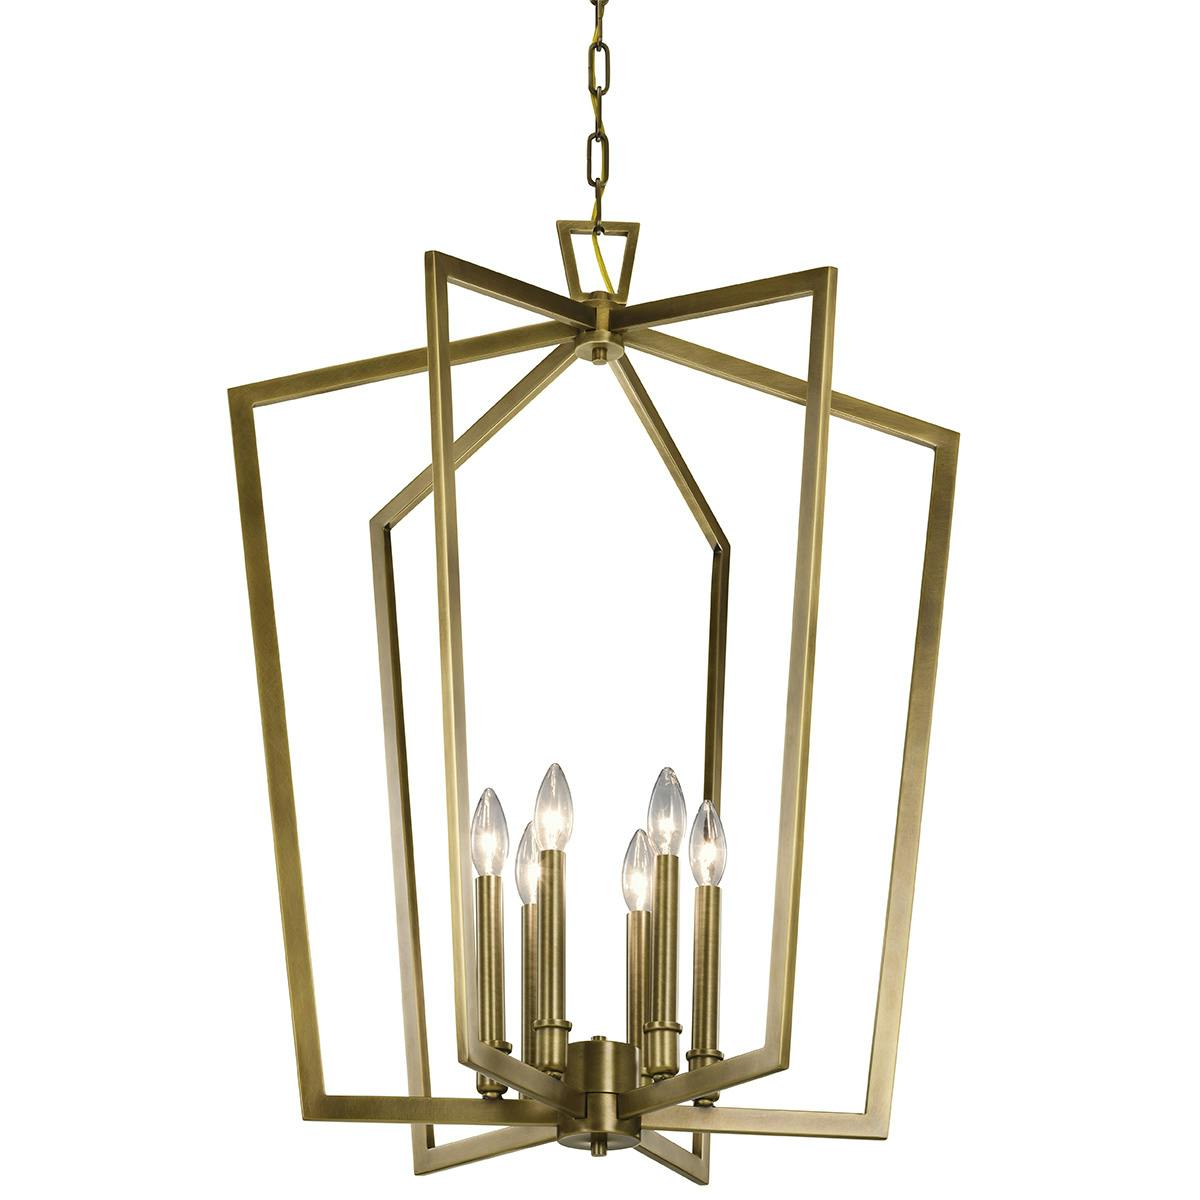 Close up view of the Abbotswell 32.25" Chandelier Brass on a white background